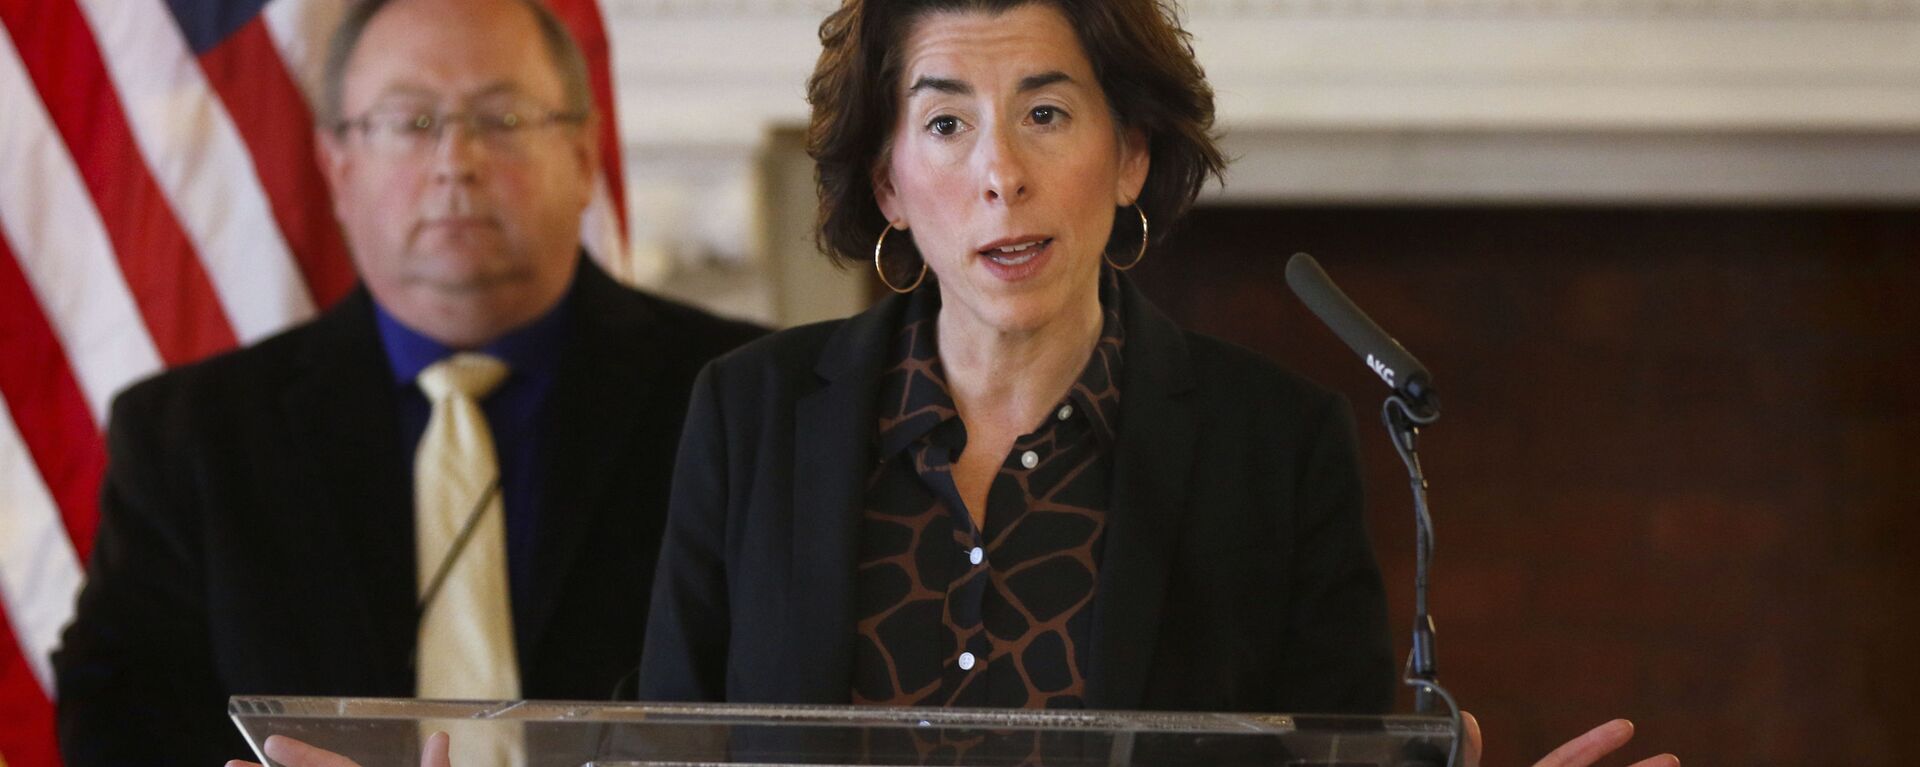 In this Sunday, March 22, 2020, file photo, Gov. Gina Raimondo gives an update on the coronavirus during a news conference, in Providence, R.I. Many states have yet to spend the federal funding they got to help with soaring costs related to the coronavirus crisis, making it tougher for states and cities to argue that they need hundreds of billions more from U.S. taxpayers. “If I knew today that another billion dollars was coming to Rhode Island to help solve our budget deficit, I’d spend the $1.25 billion now,” Raimondo said about the state's portion of money. “Lots of other governors are spending. They’re taking a gamble, and I’m just not ready to do that yet.” - اسپوتنیک افغانستان  , 1920, 10.03.2022